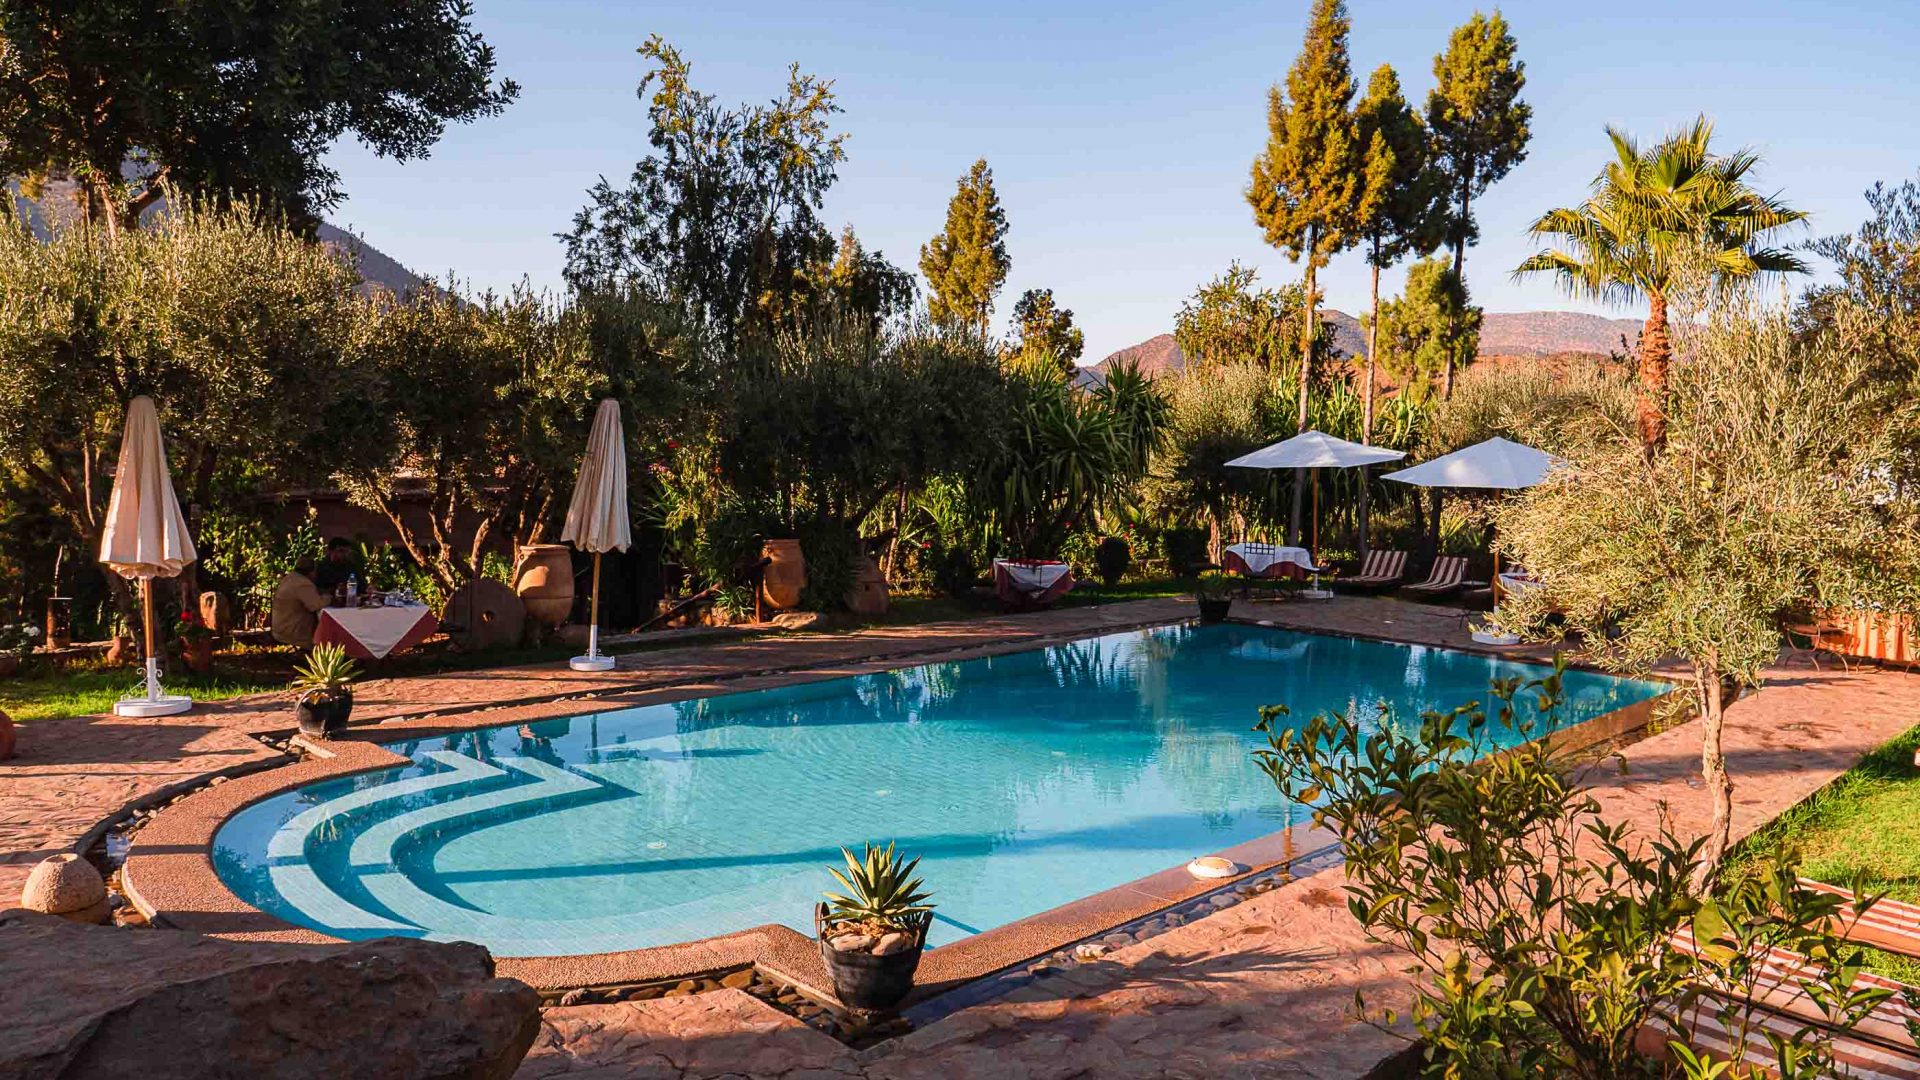 A swimming pool in picturesque surrounds.